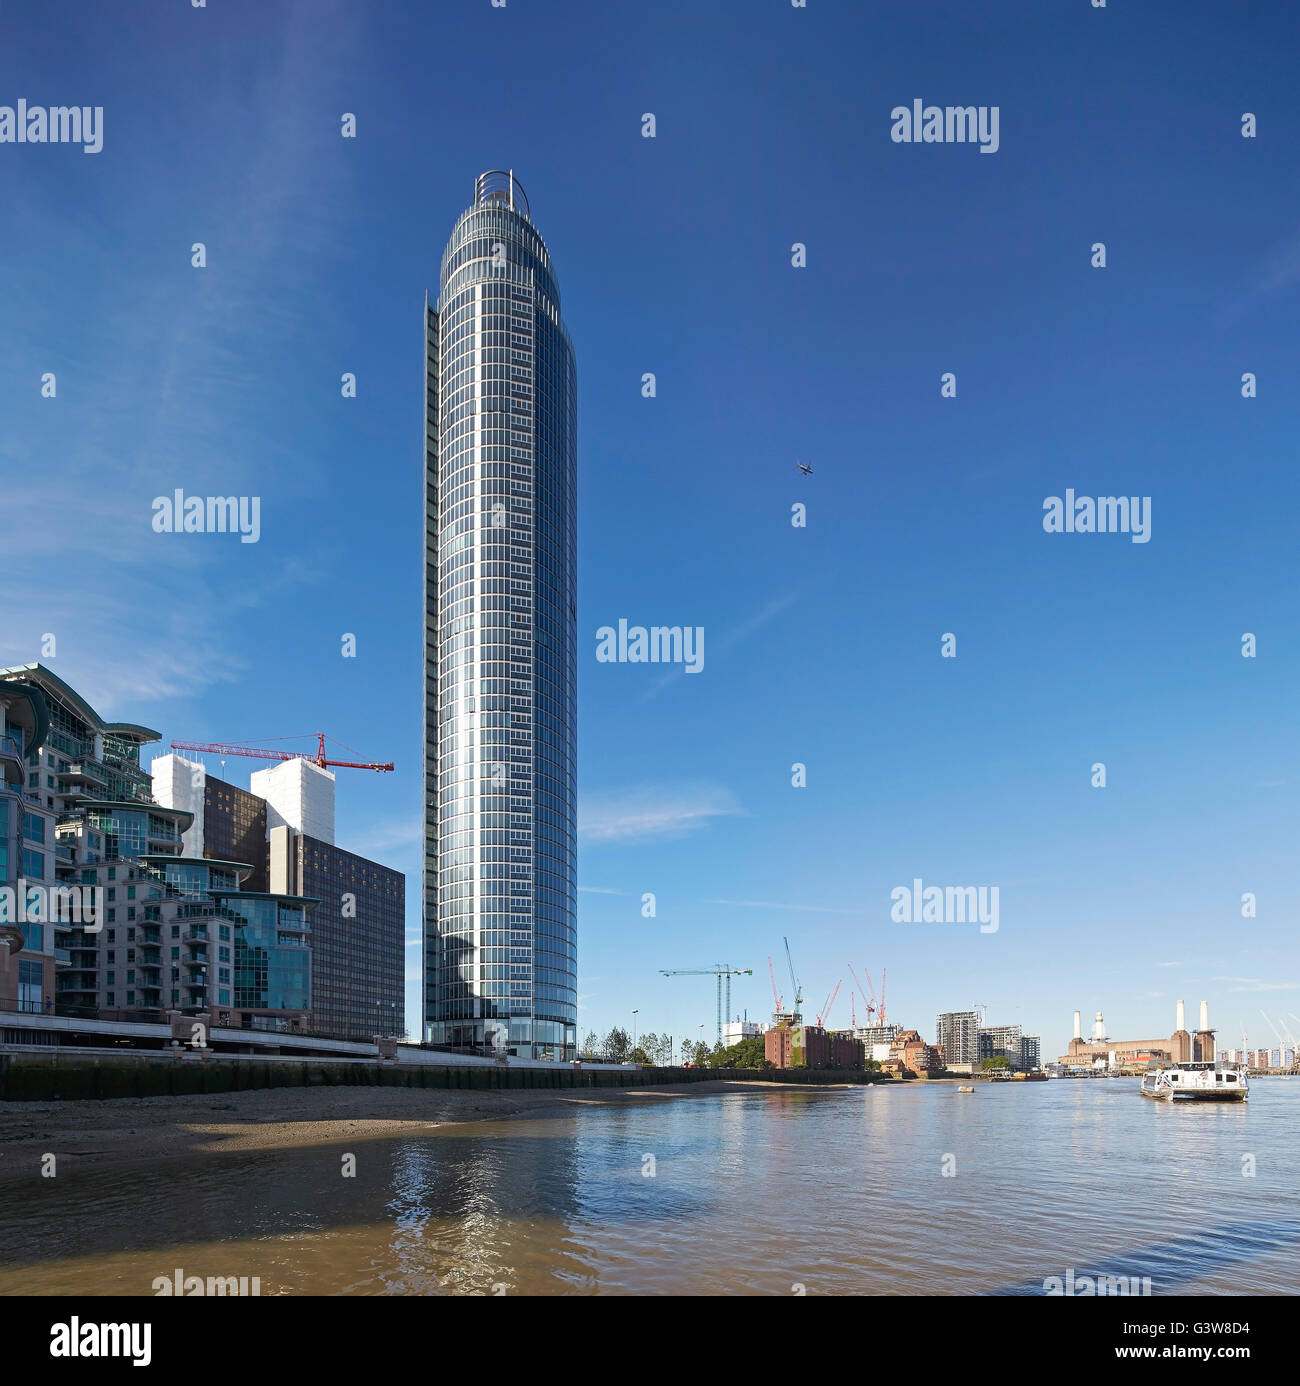 View across river Thames towards high-rise and context. St George Wharf Tower, London, United Kingdom. Architect: Broadway Malyan Limited, 2014. Stock Photo